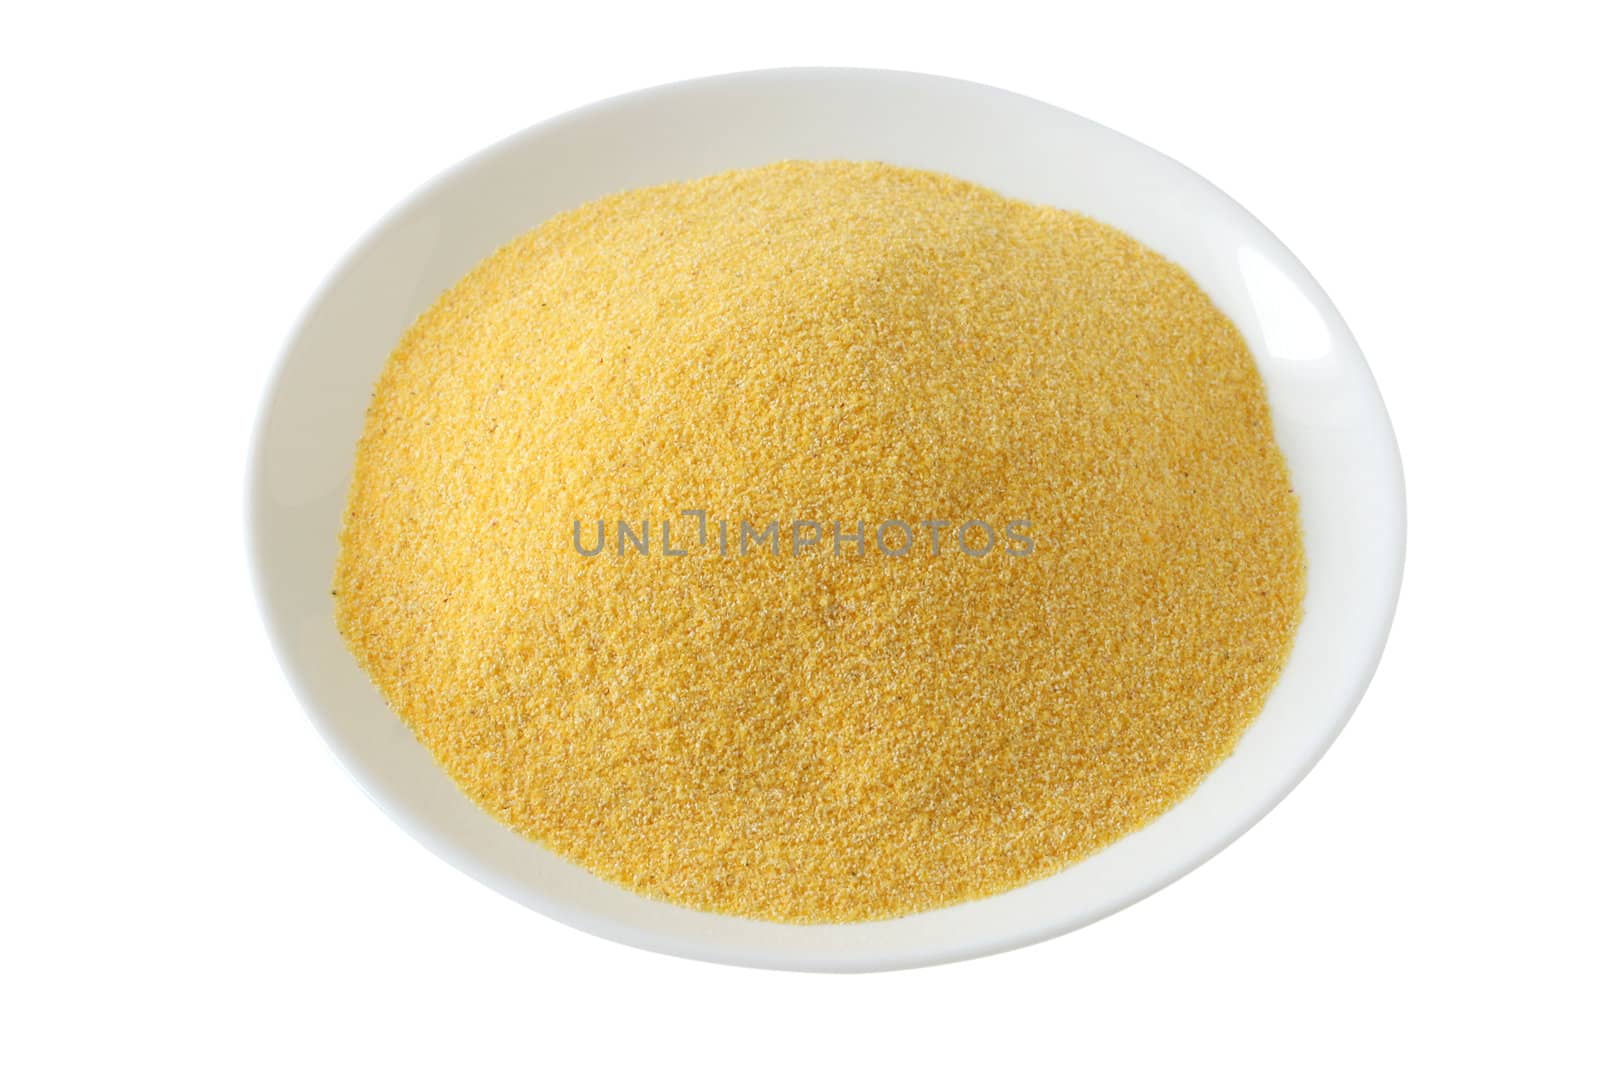 cornmeal on the white plate